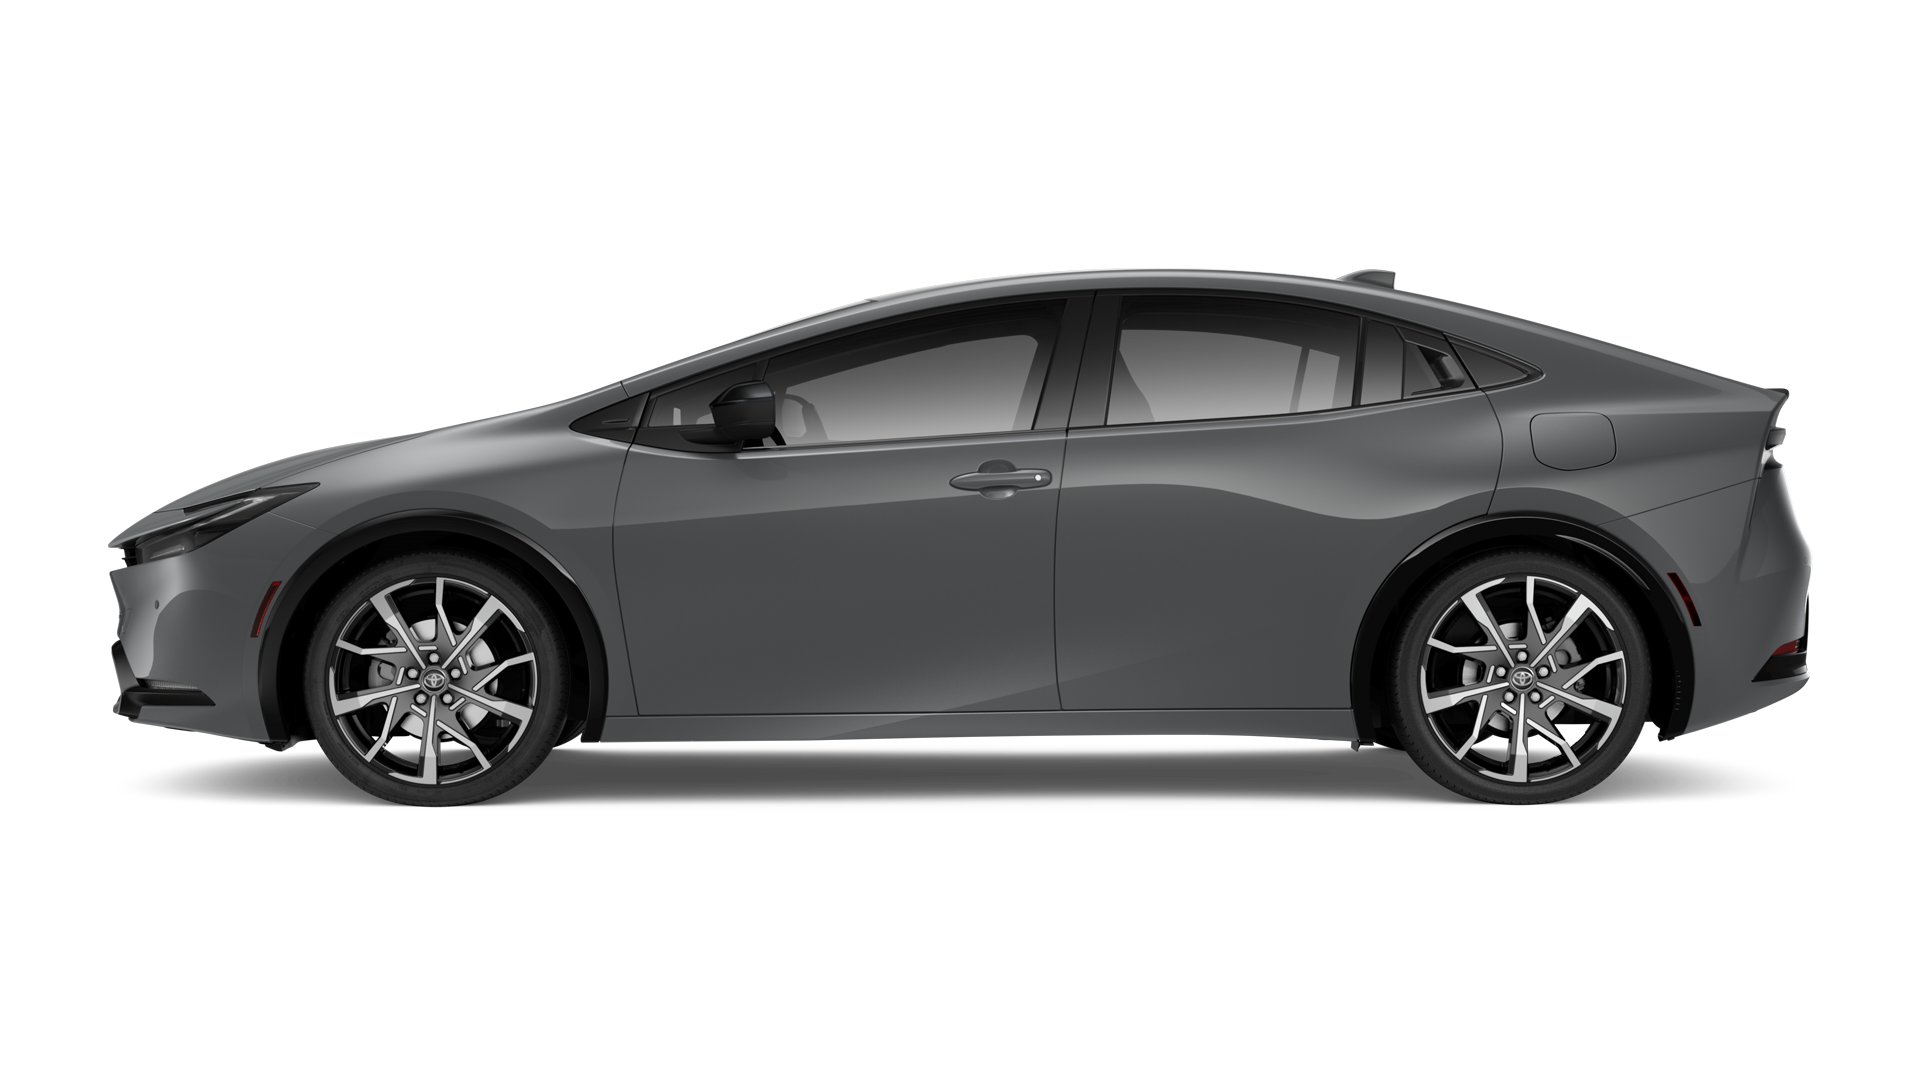 2024 Toyota Prime in Guardian Gray.